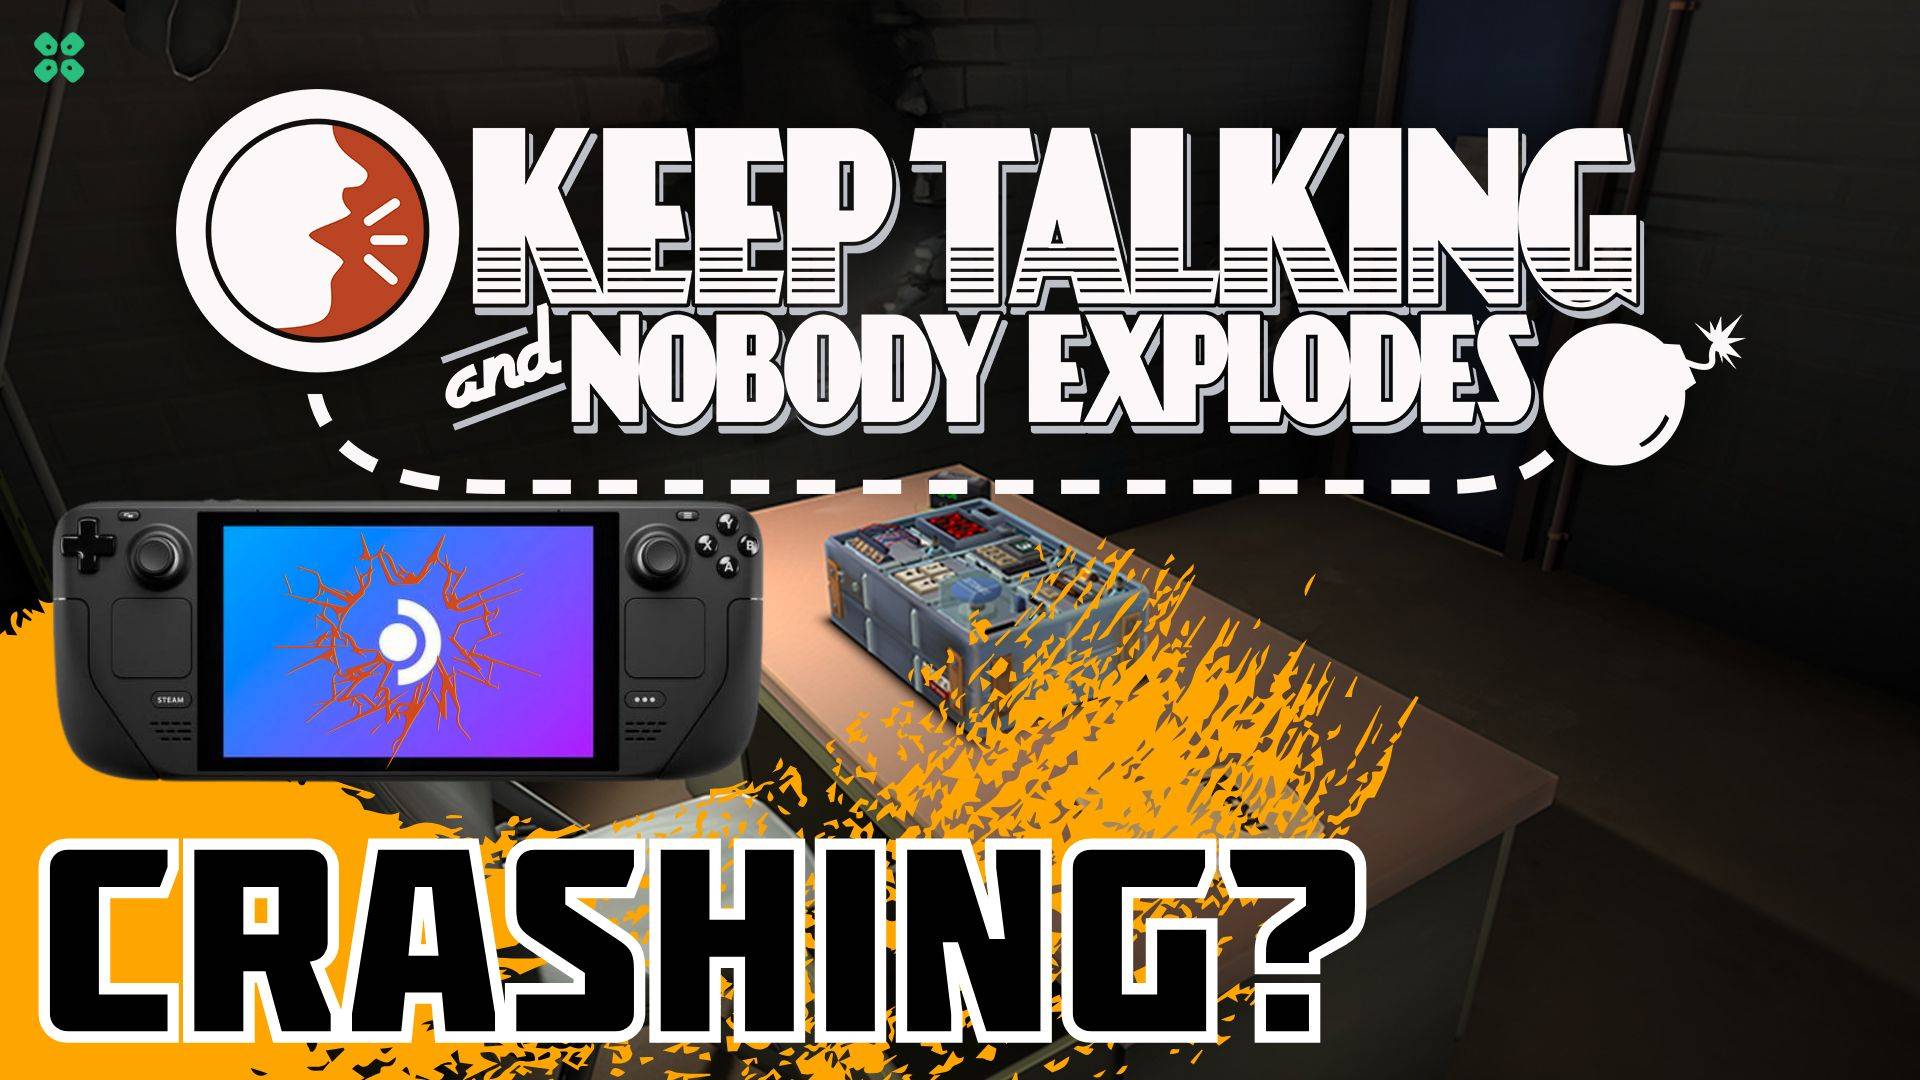 Artwork of Keep Talking and Nobody Explodes and its fix of crashing by TCG